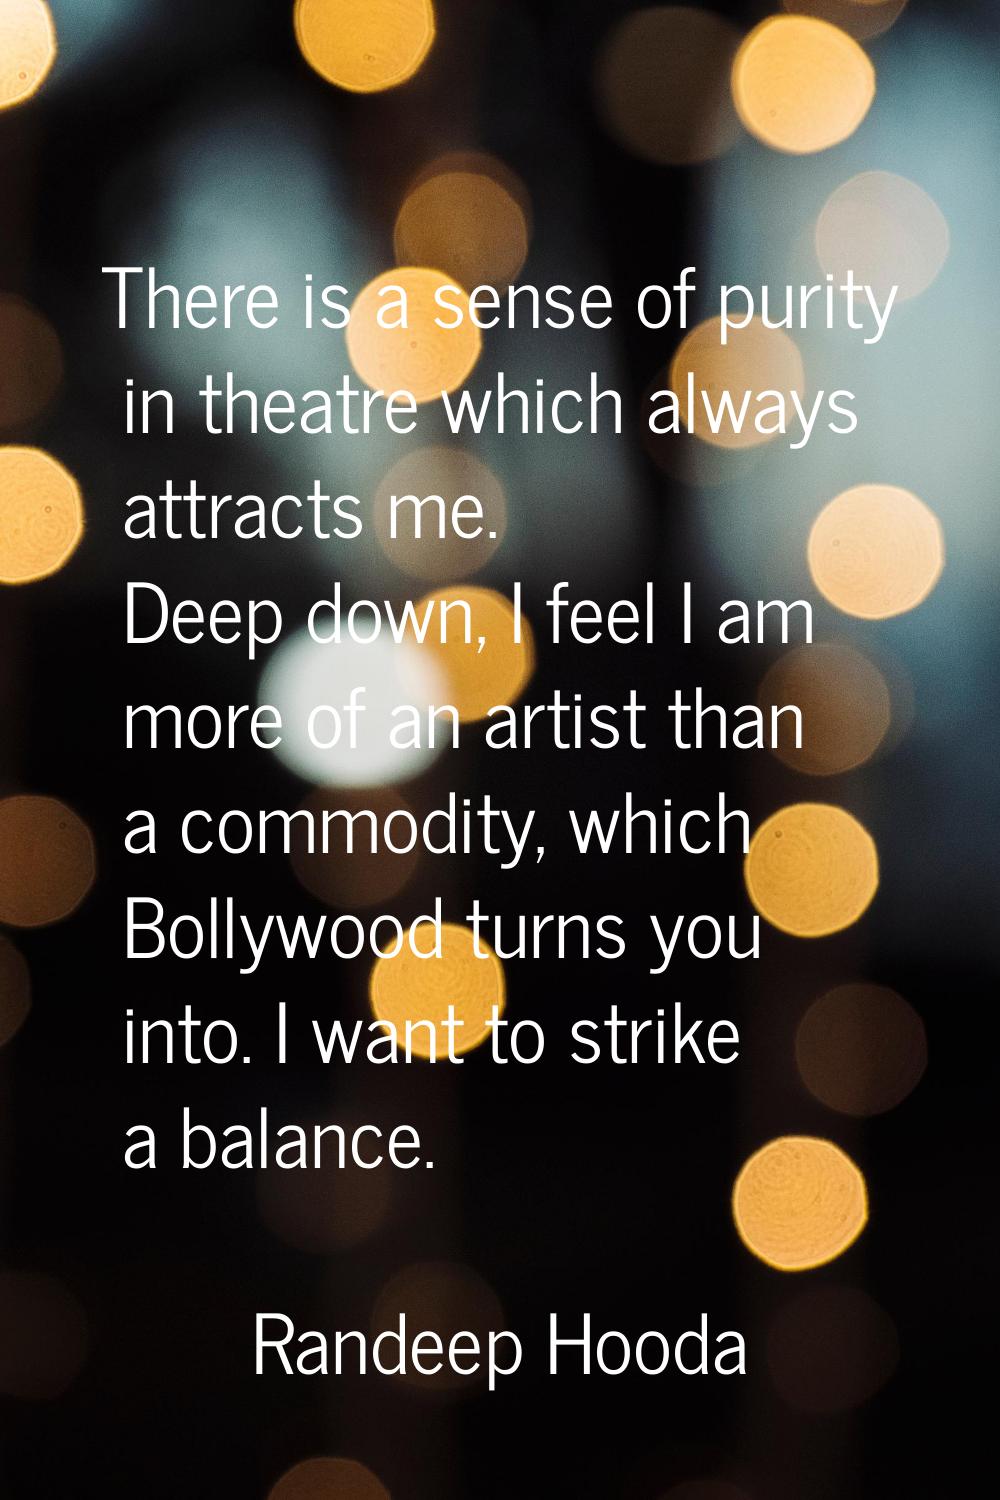 There is a sense of purity in theatre which always attracts me. Deep down, I feel I am more of an a